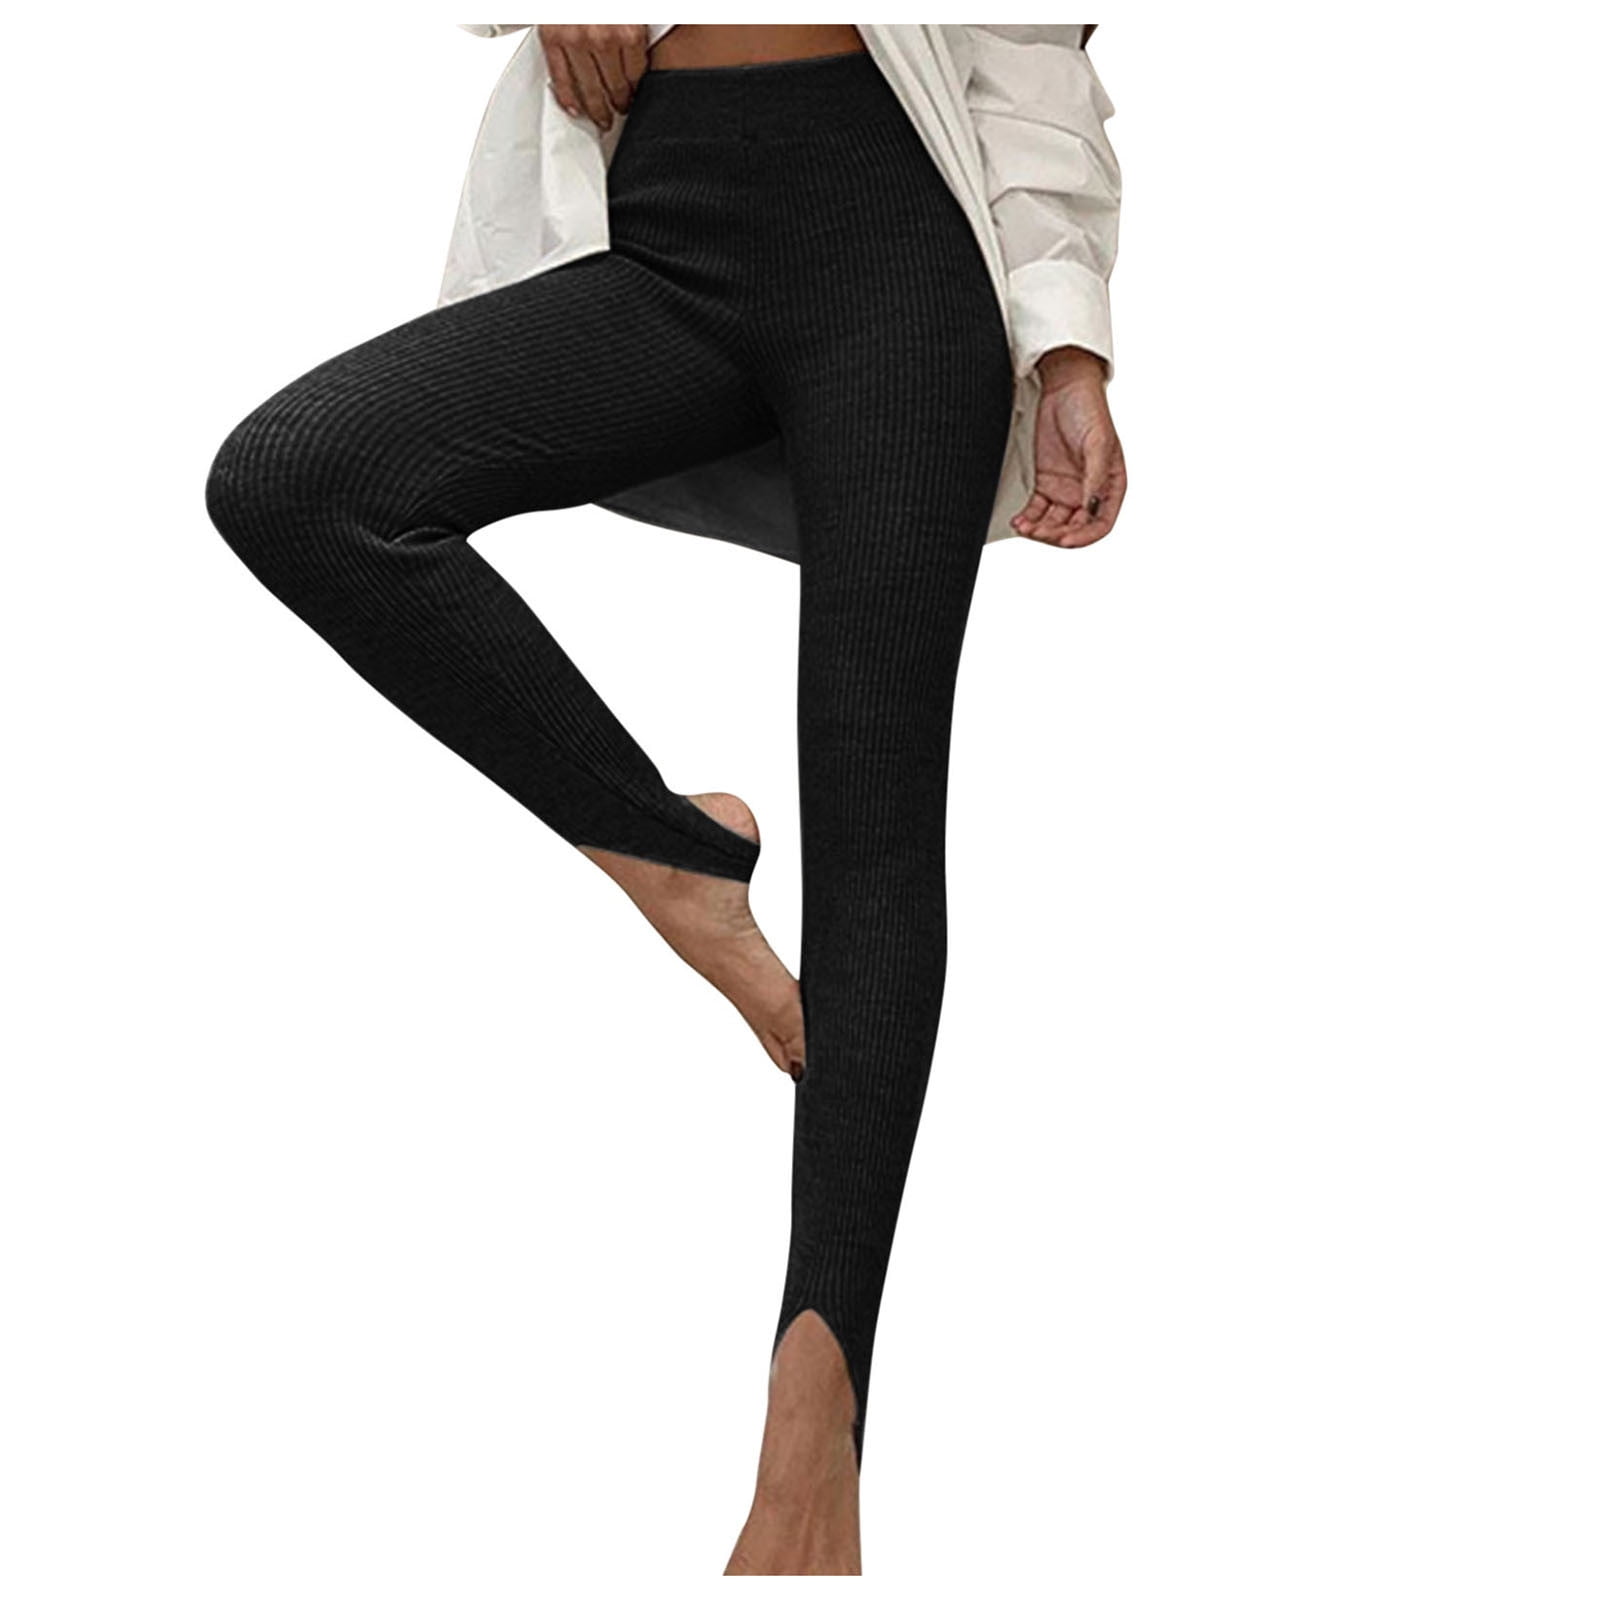 Labakihah yoga pants Women Solid High Waisted Stretchy Slim Fit